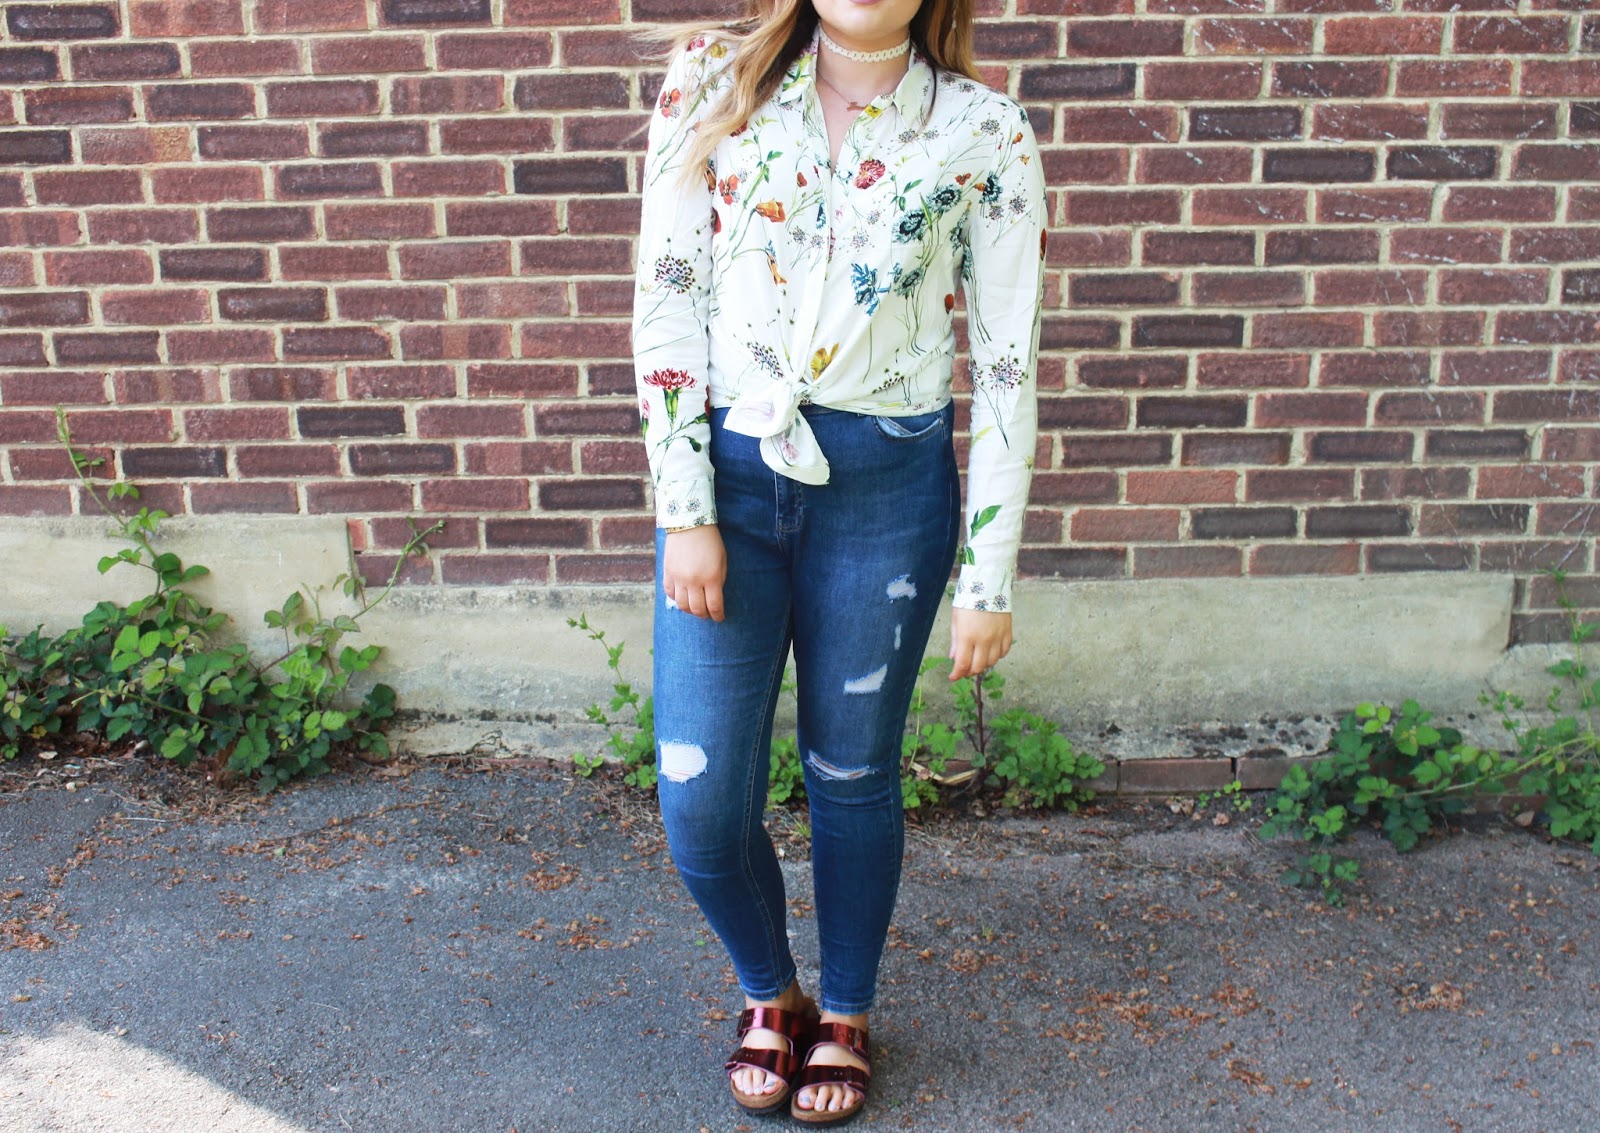 summer body confidence, the confident way to step into summer, summer outfit ideas, spring outfit ideas, summer ootd 2016, warehouse floral shirt, misguided ripped jeans, cheap reflective sunglasses, chocker style 2016, cool ways to wear birkenstocks